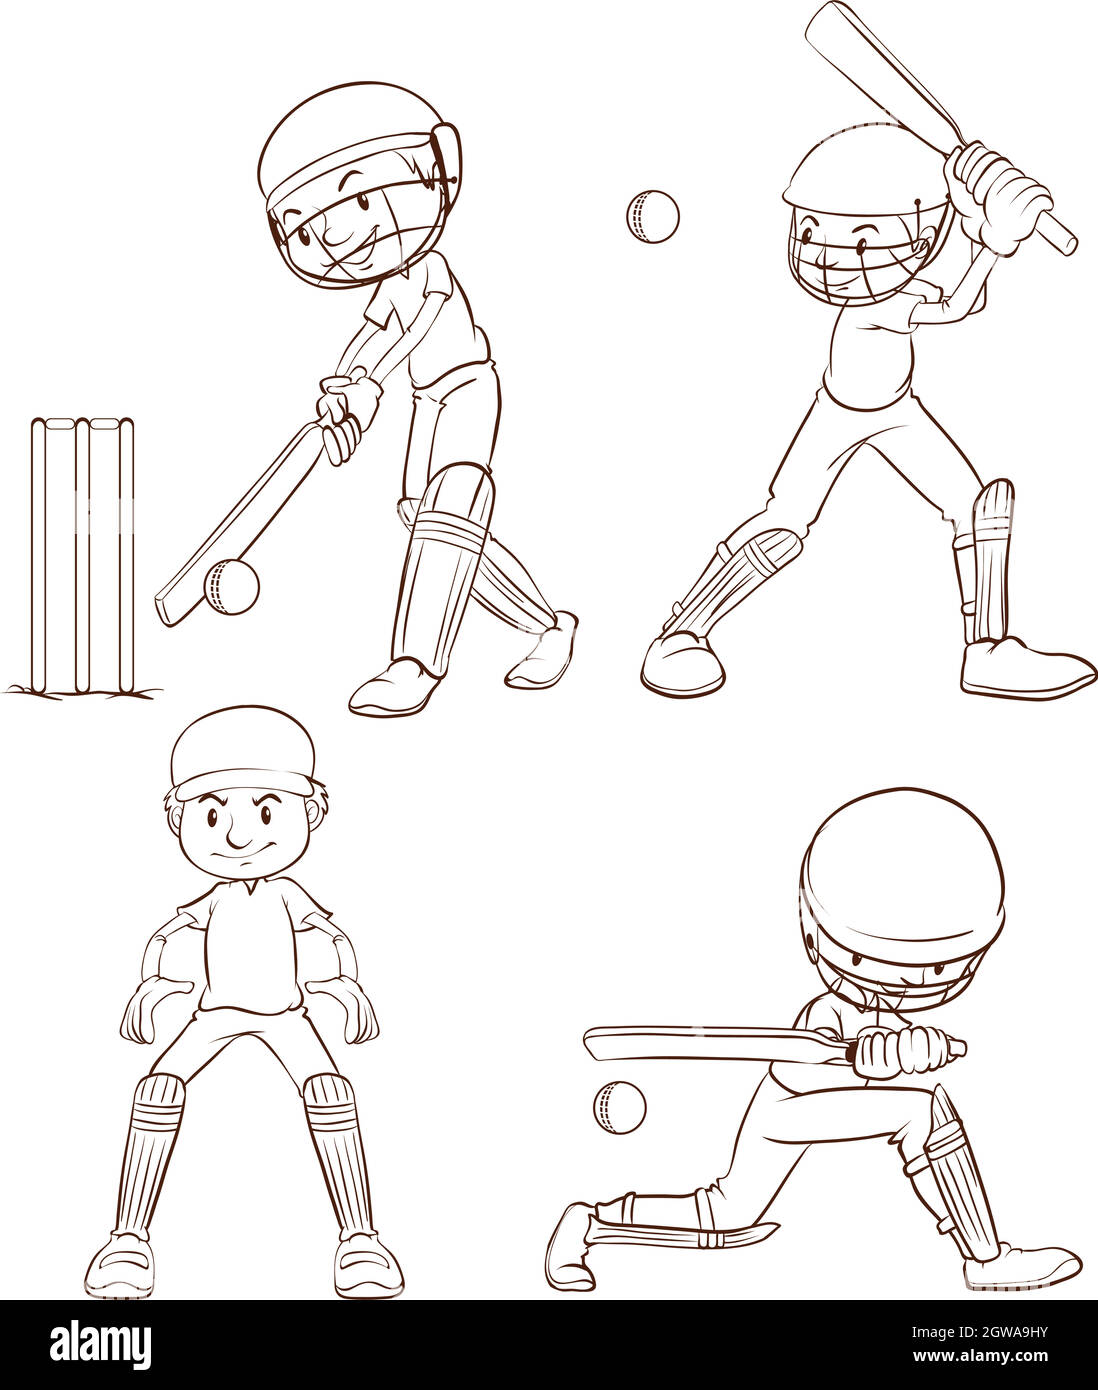 Plain sketches of the cricket players Stock Vector